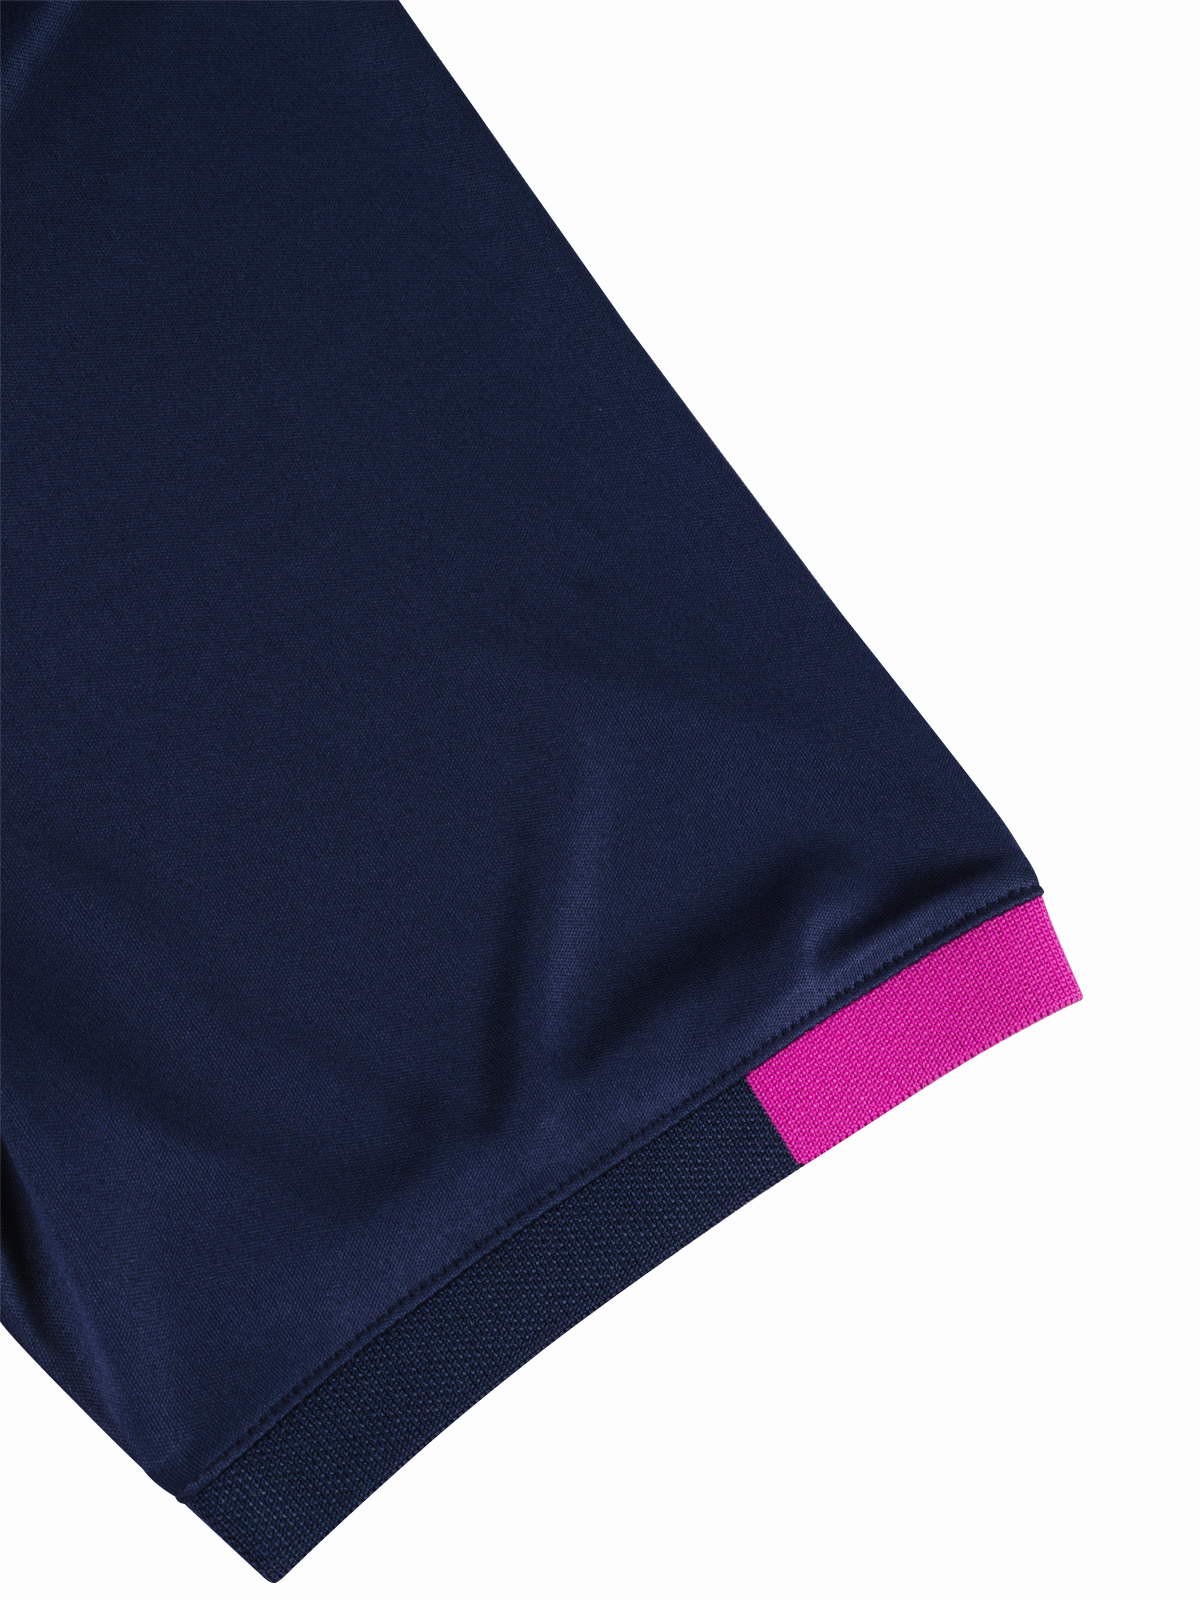 picture of pro player jersey - magenta